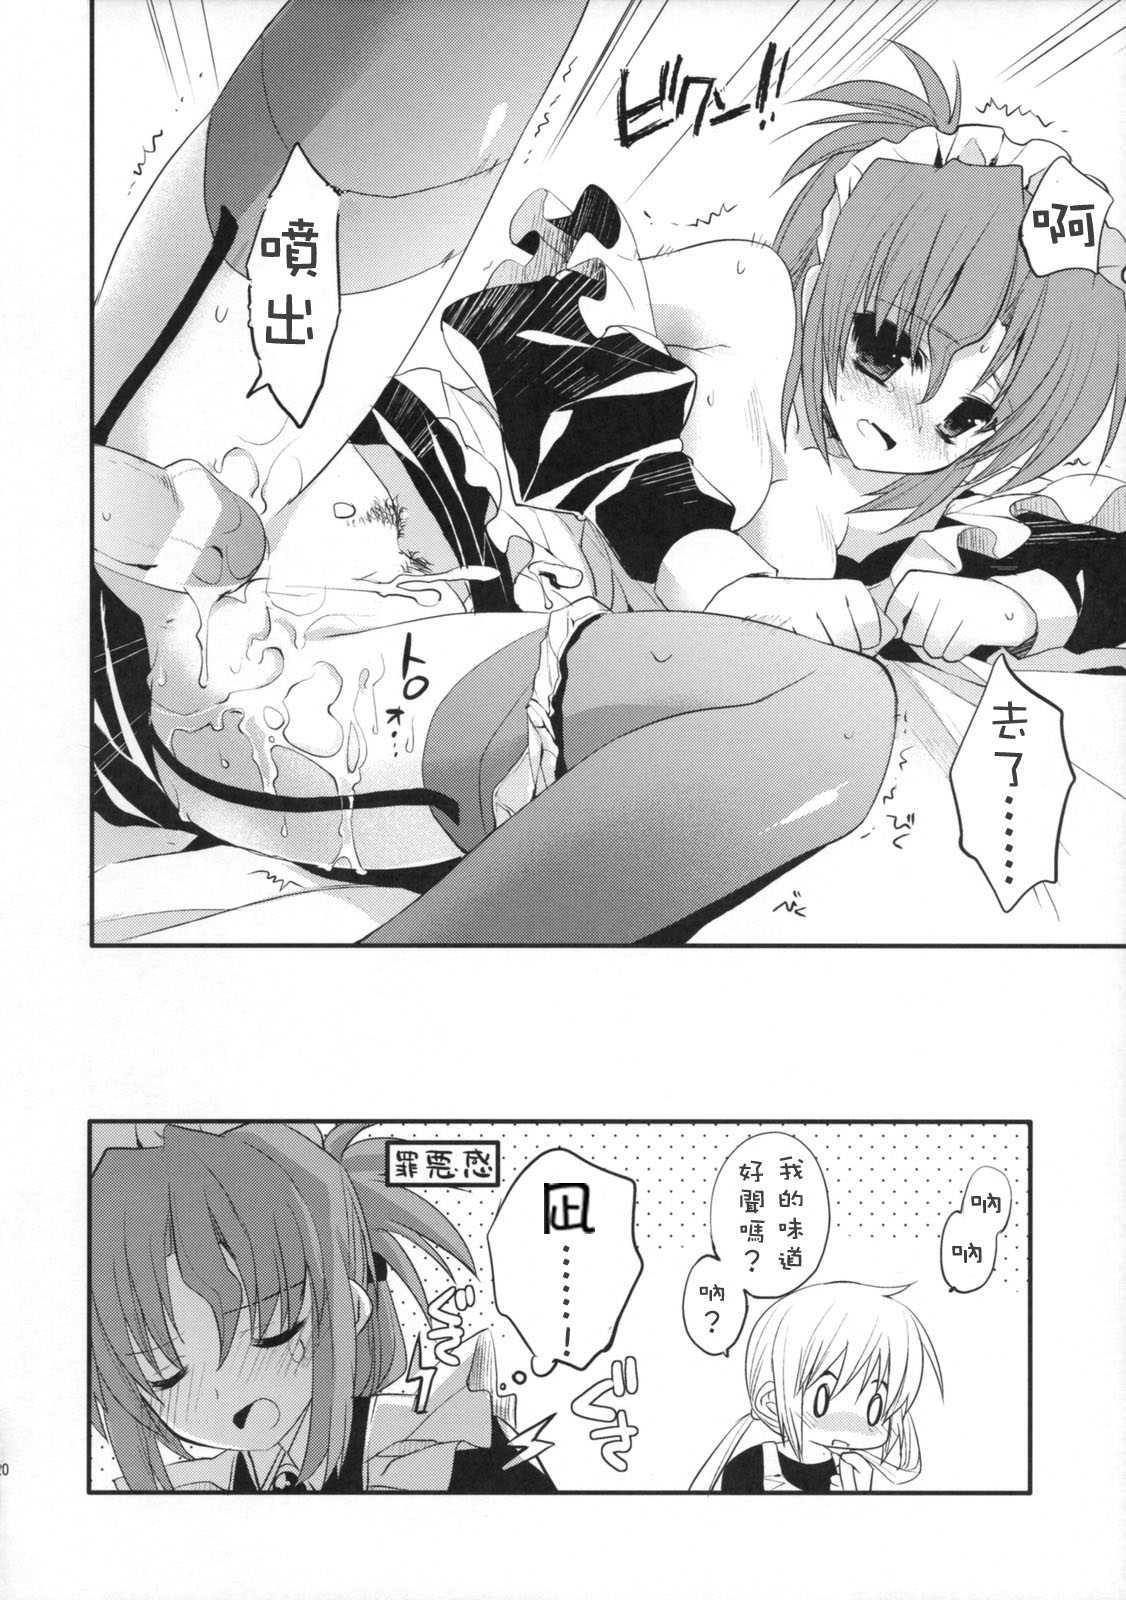 (C76) [D&middot;N&middot;A.Lab. &amp; ARESTICA] BLOOMING FLOWER (Hayate no Gotoku!) (CN) (C76) (同人誌) [D・N・A.Lab. + ARESTICA] BLOOMING FLOWER (ハヤテのごとく!) (中文)